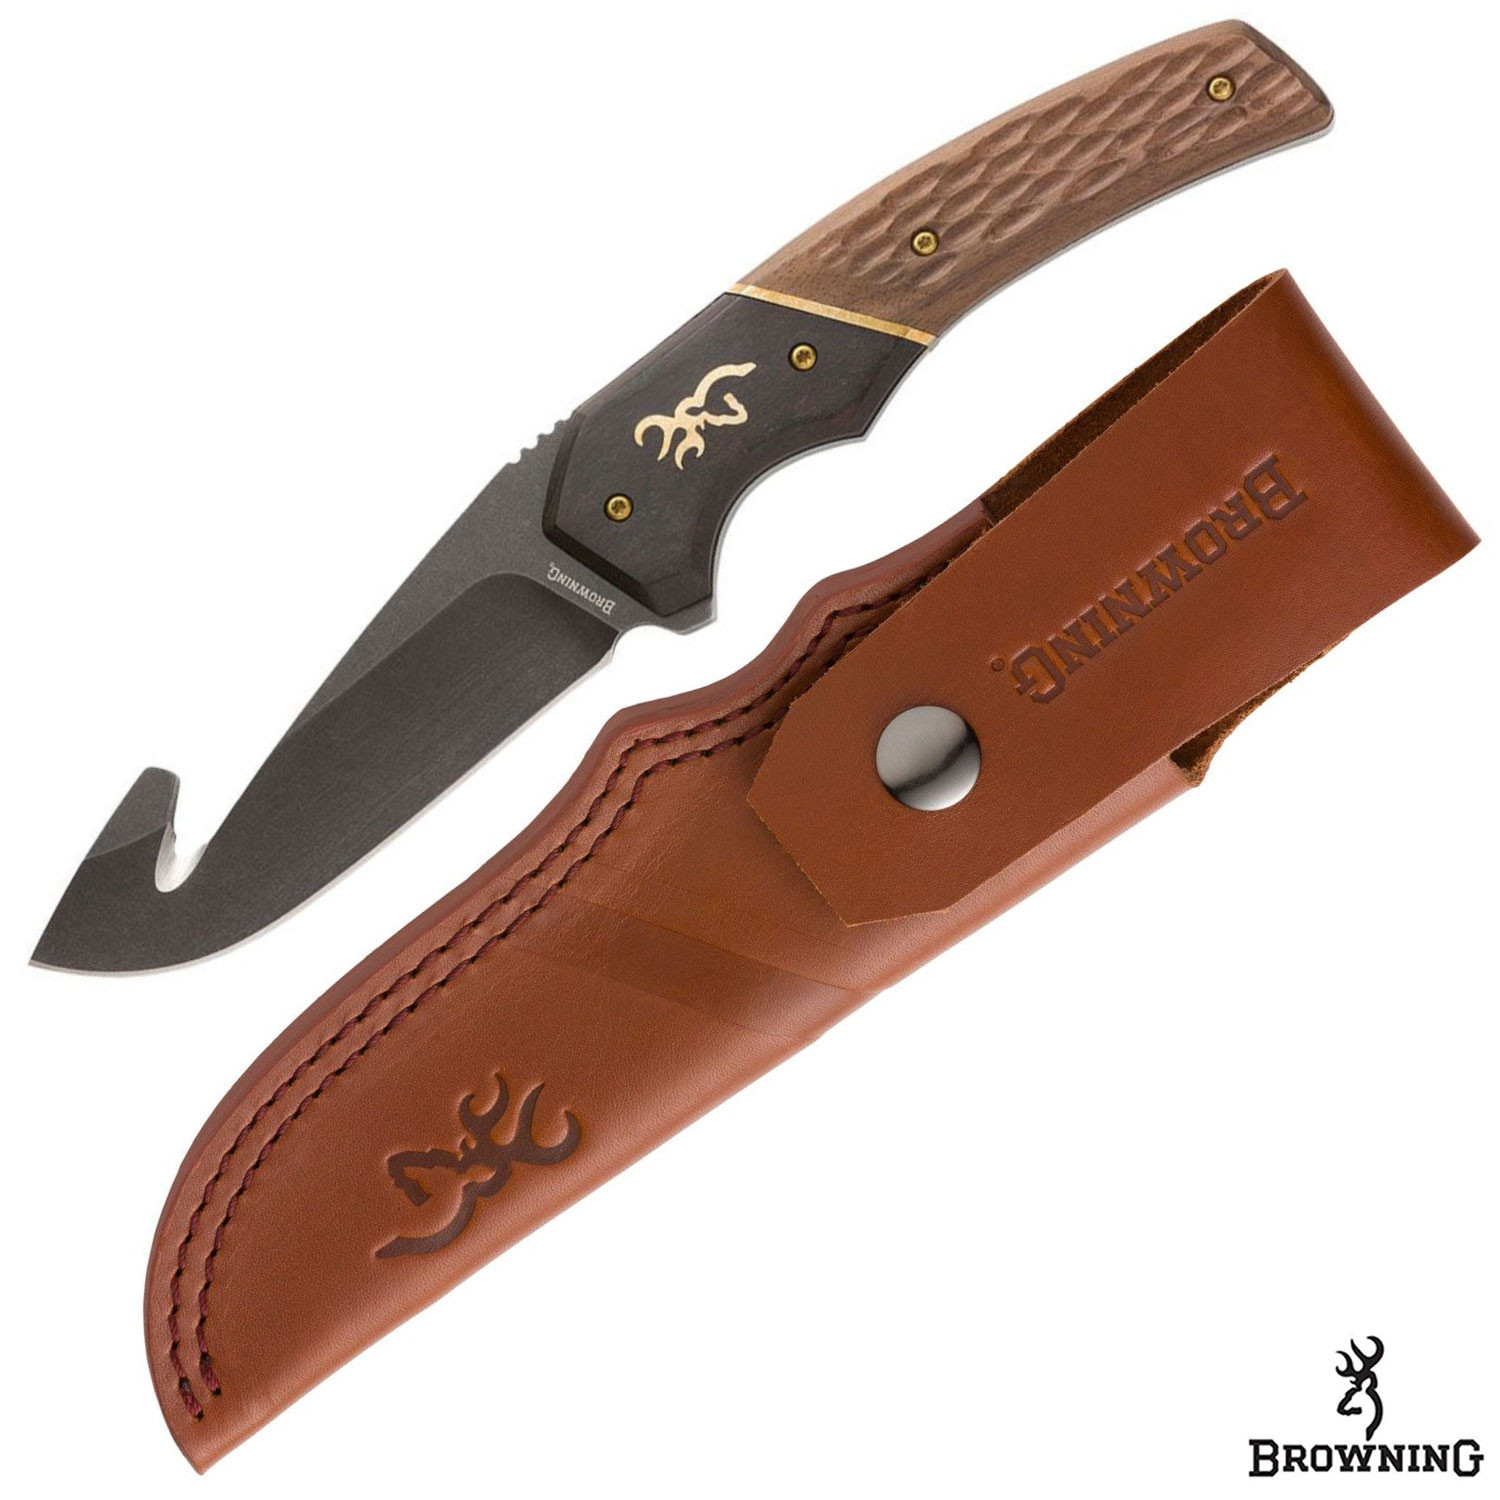 Browning 8.5" Hunter Fixed Blade Gut Hook Knife $29.99 + Free Shipping